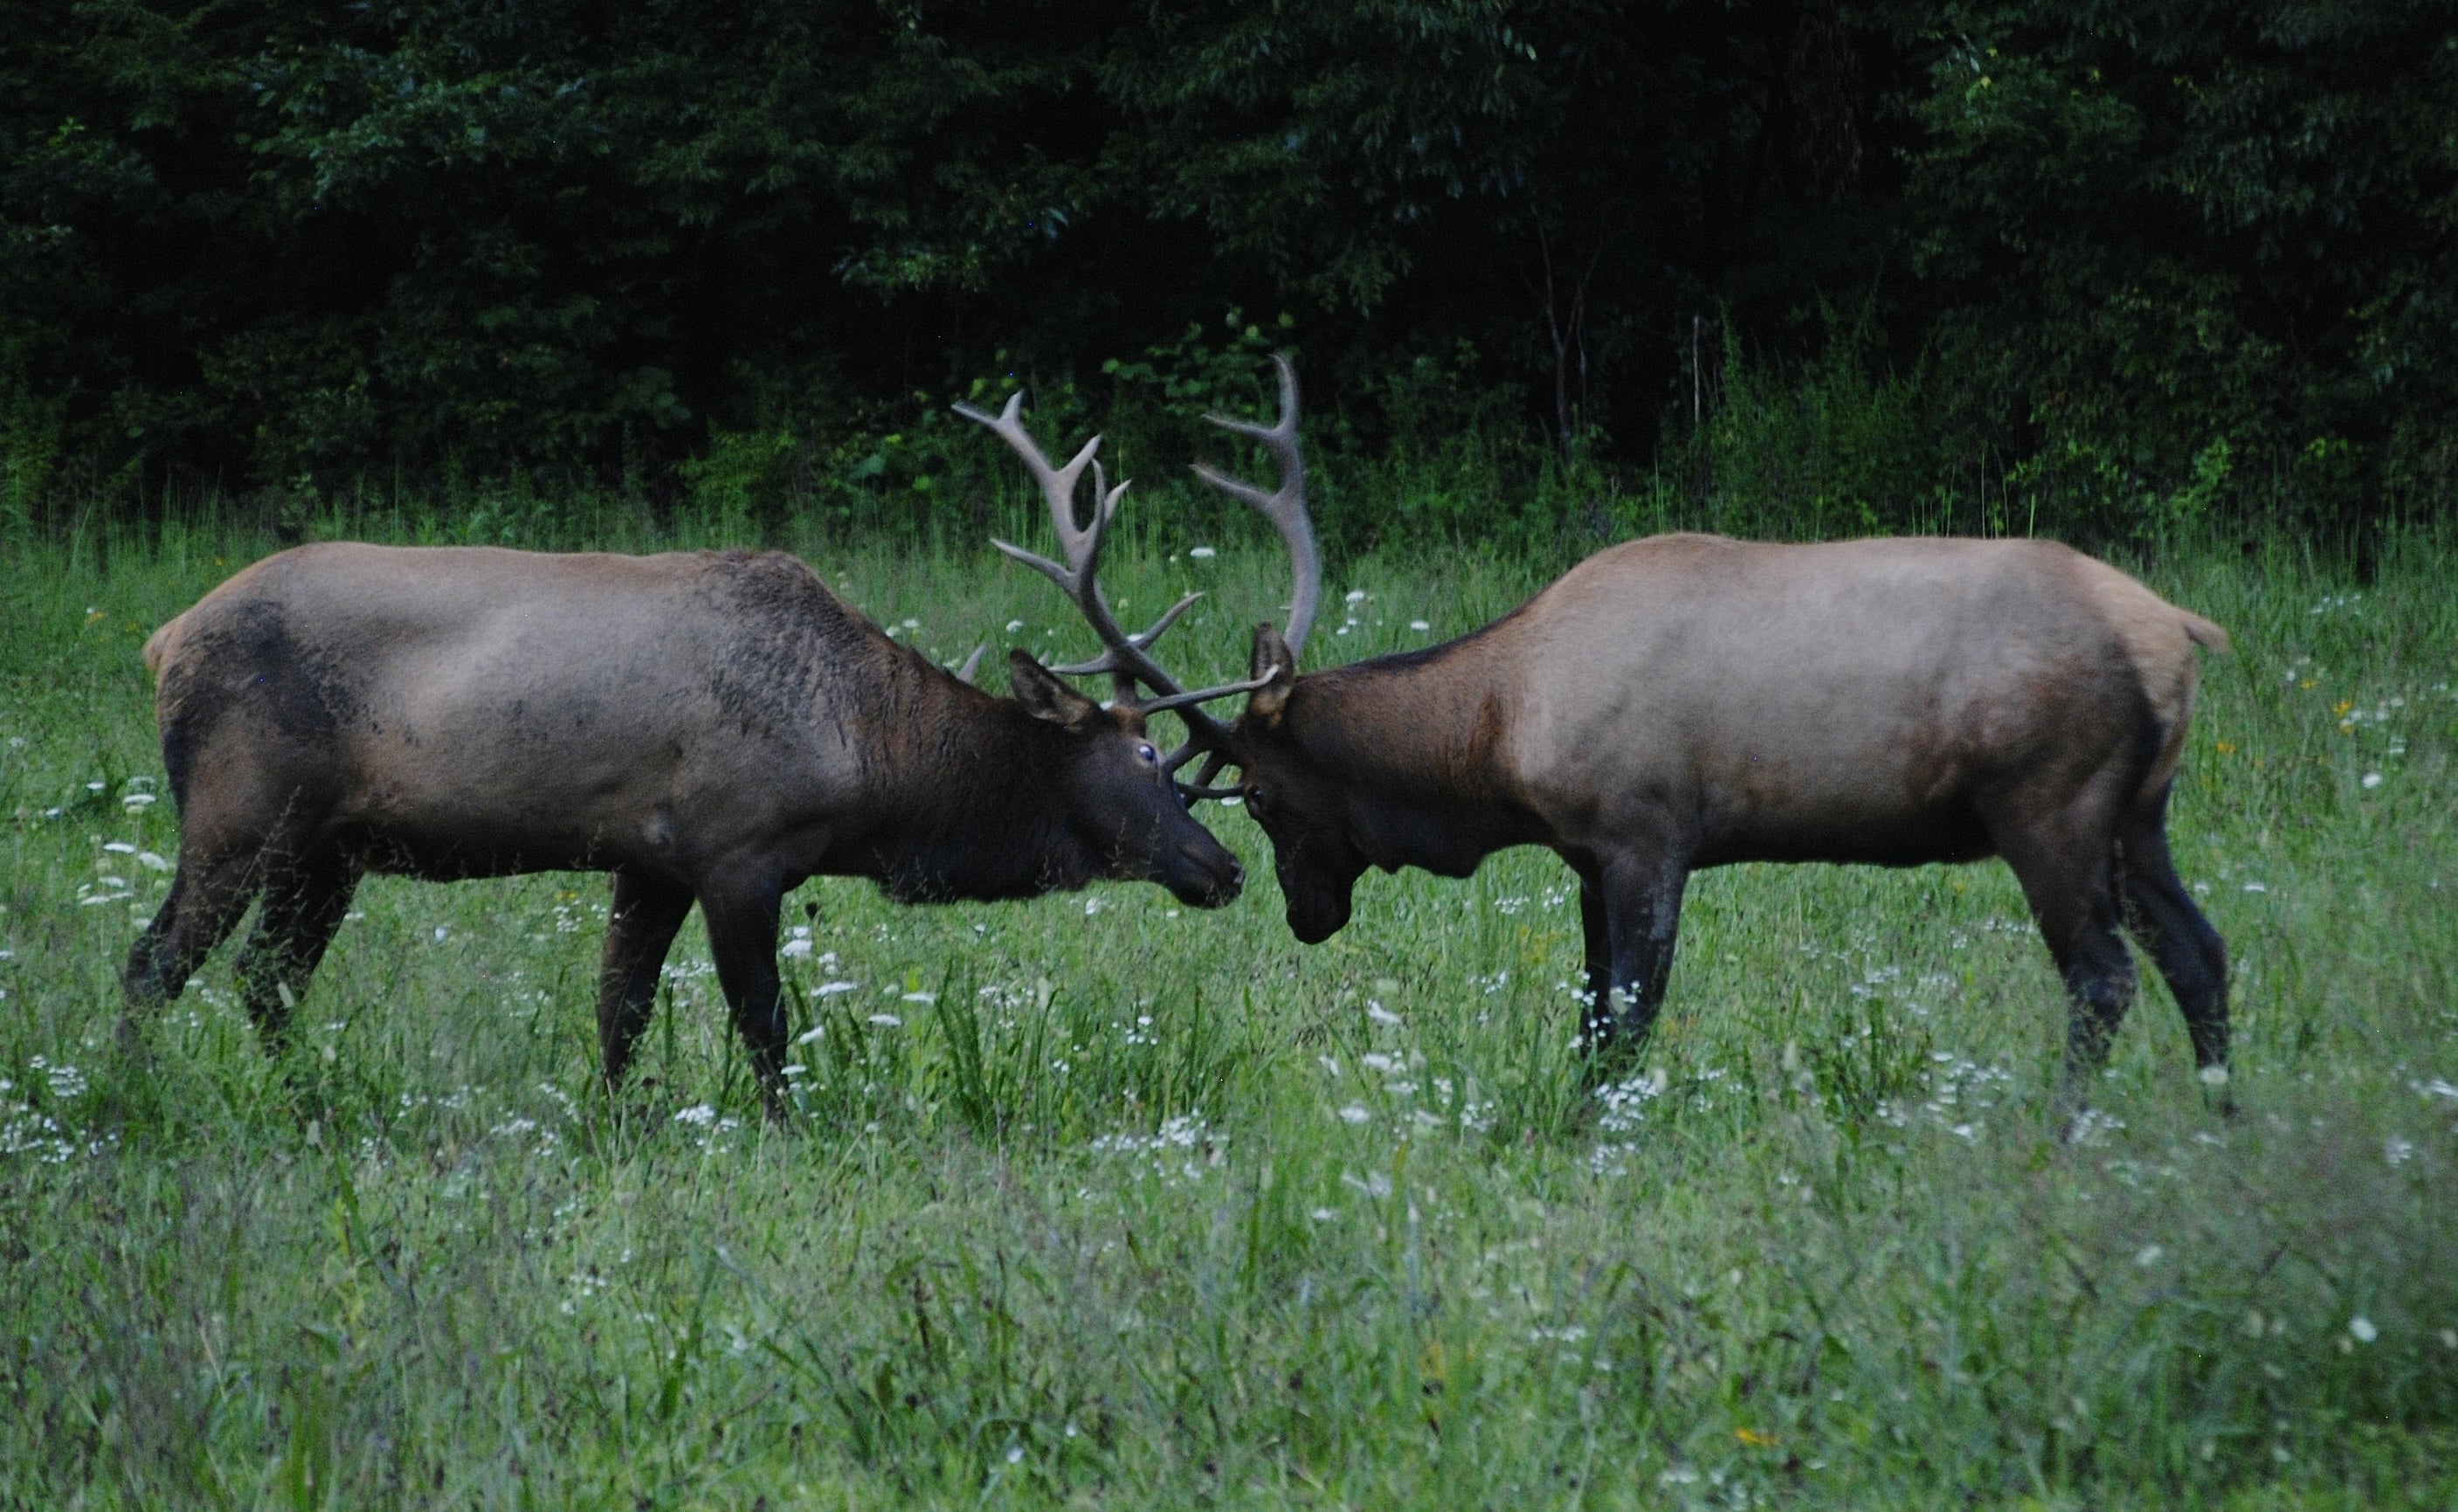 Two of the MANY elk you could possibly see